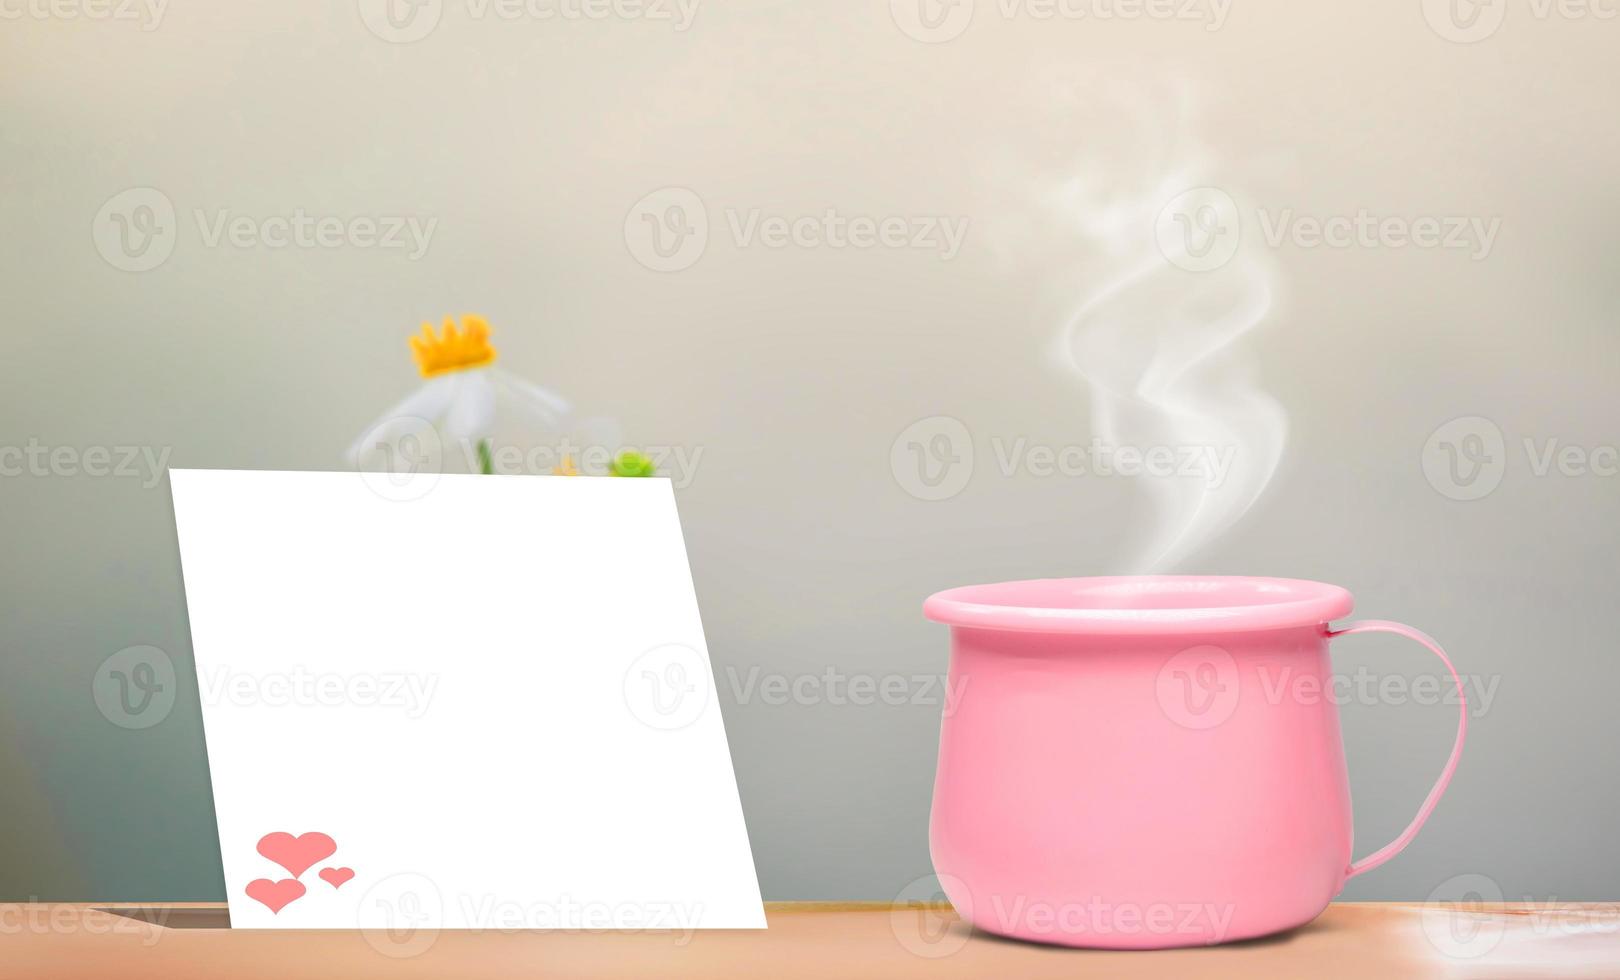 A bright pink metallic coffee cup on vacation.  And there is a blank sheet of note paper for inserting the contents. mock up and copy space photo